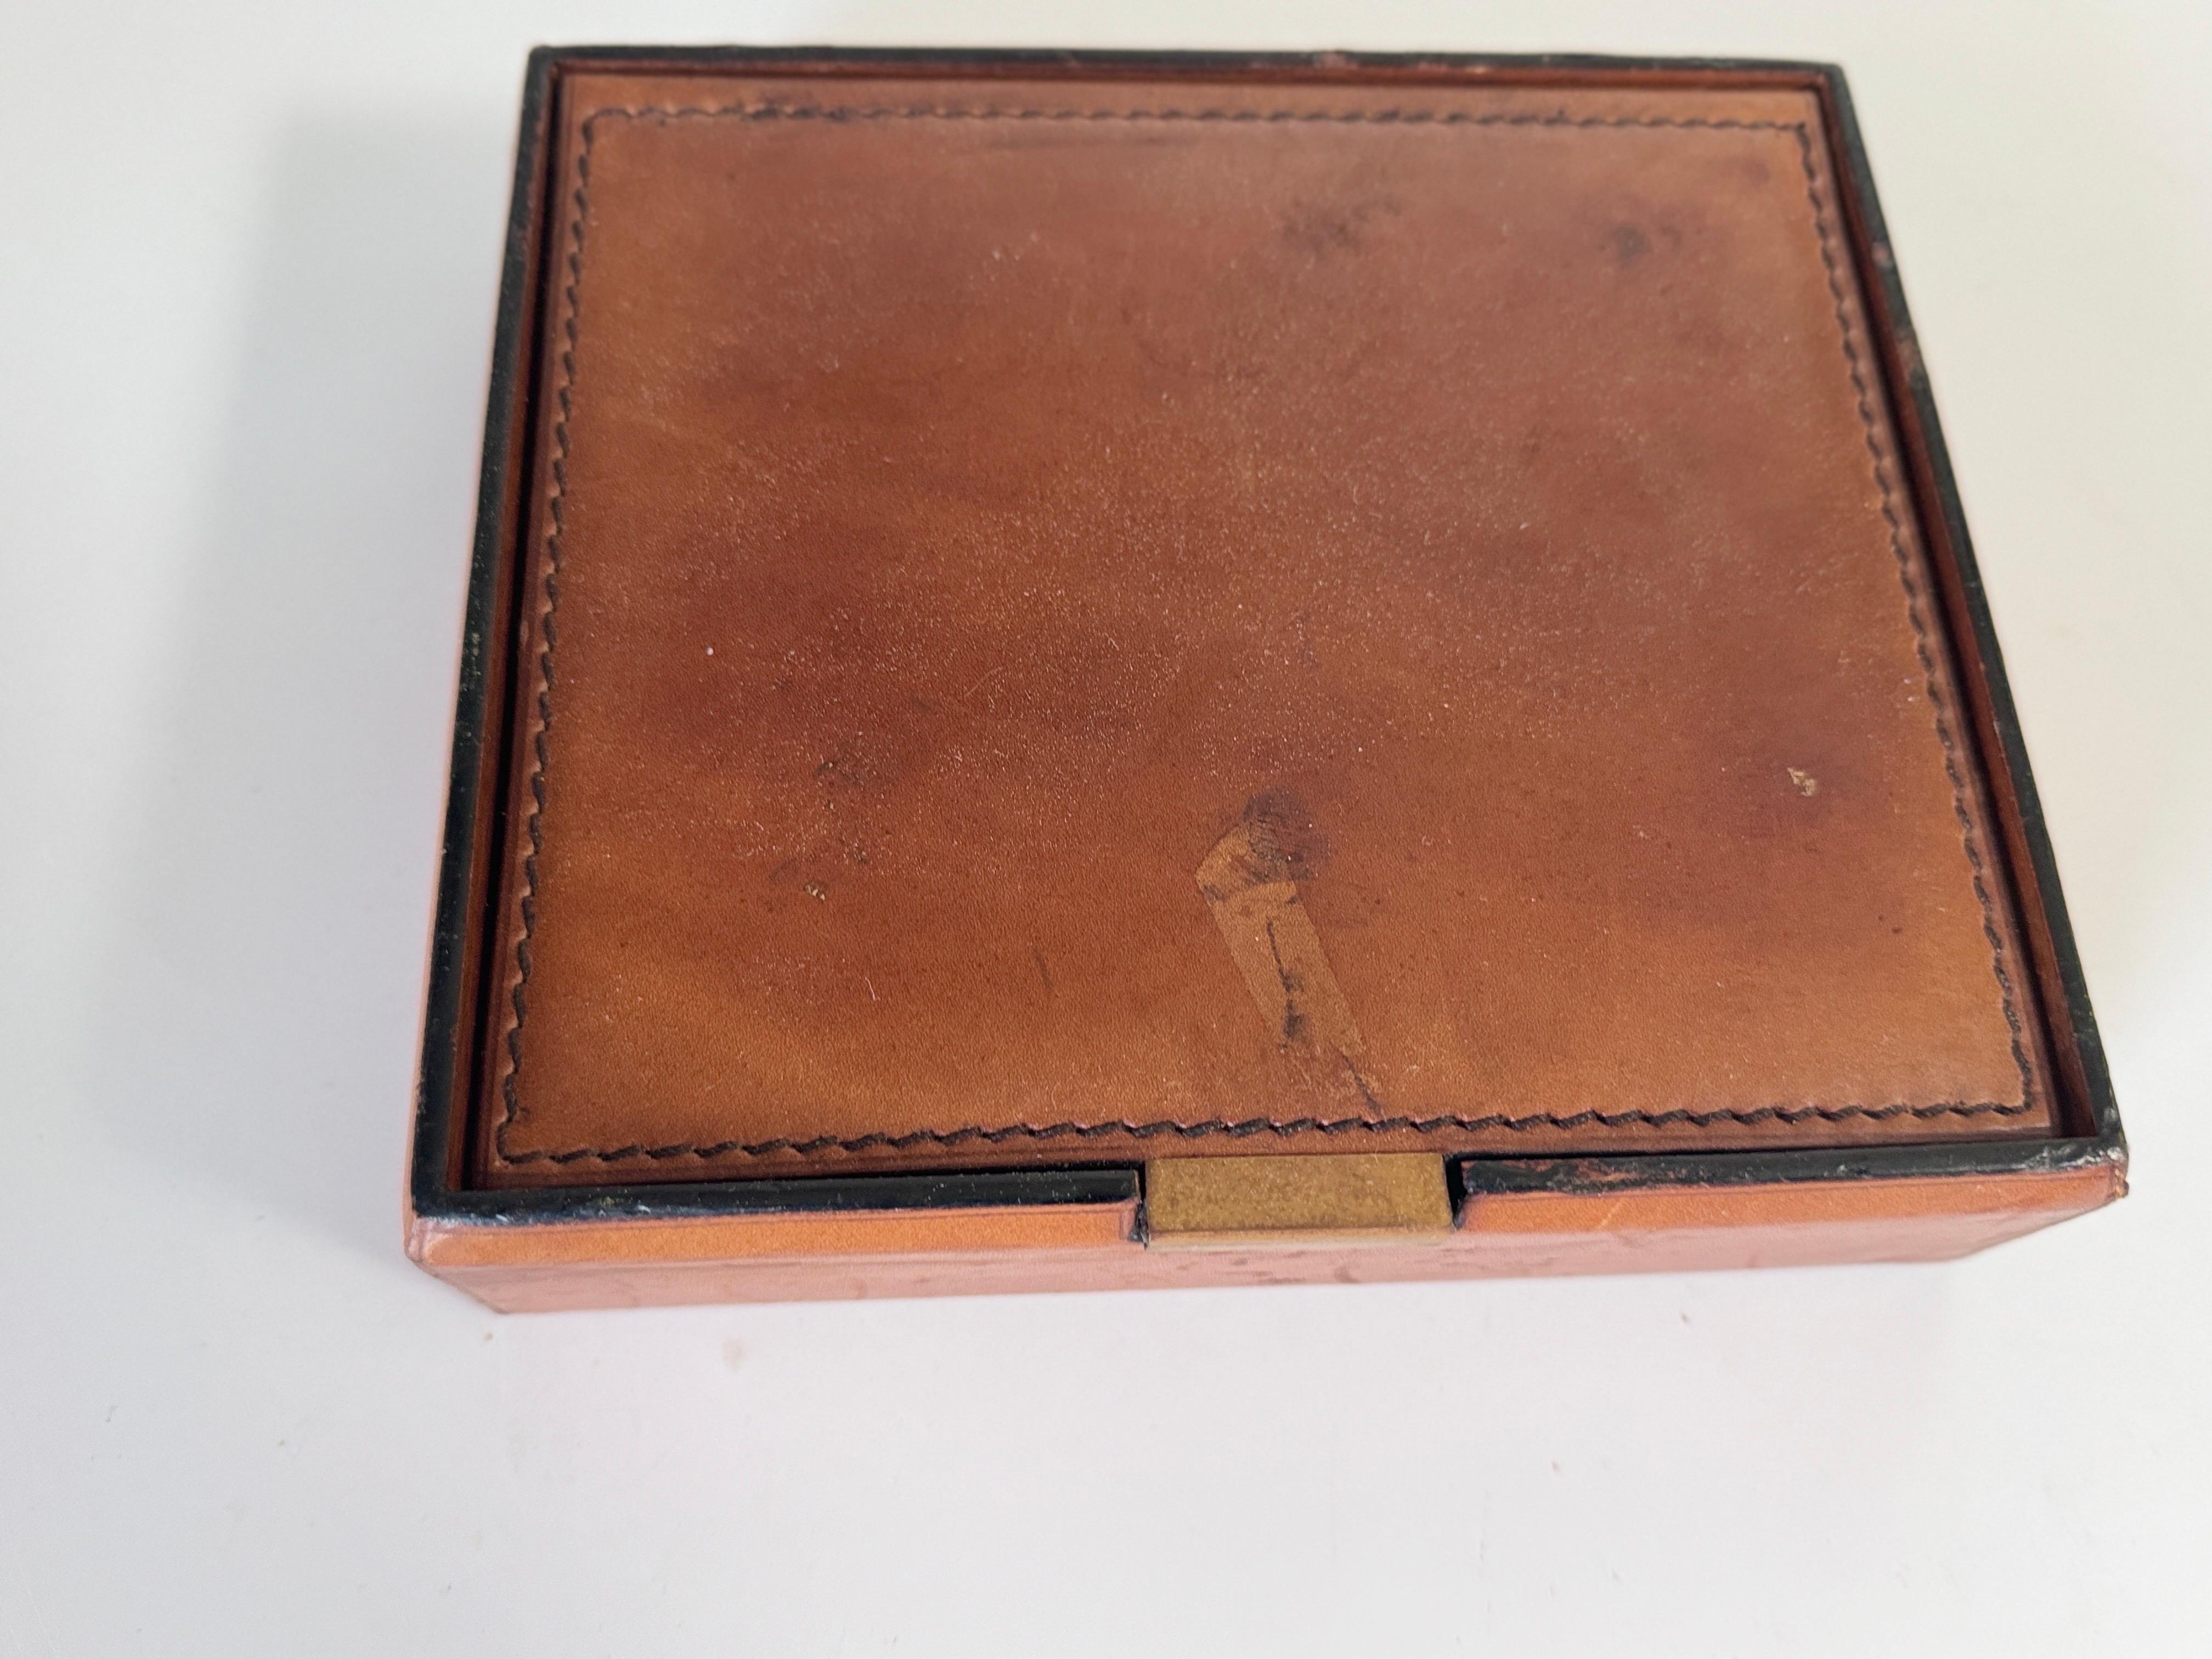 Leather Covered Tobacco Box Wood Brown Jacques Adnet Style France 1940 by Lancel For Sale 6